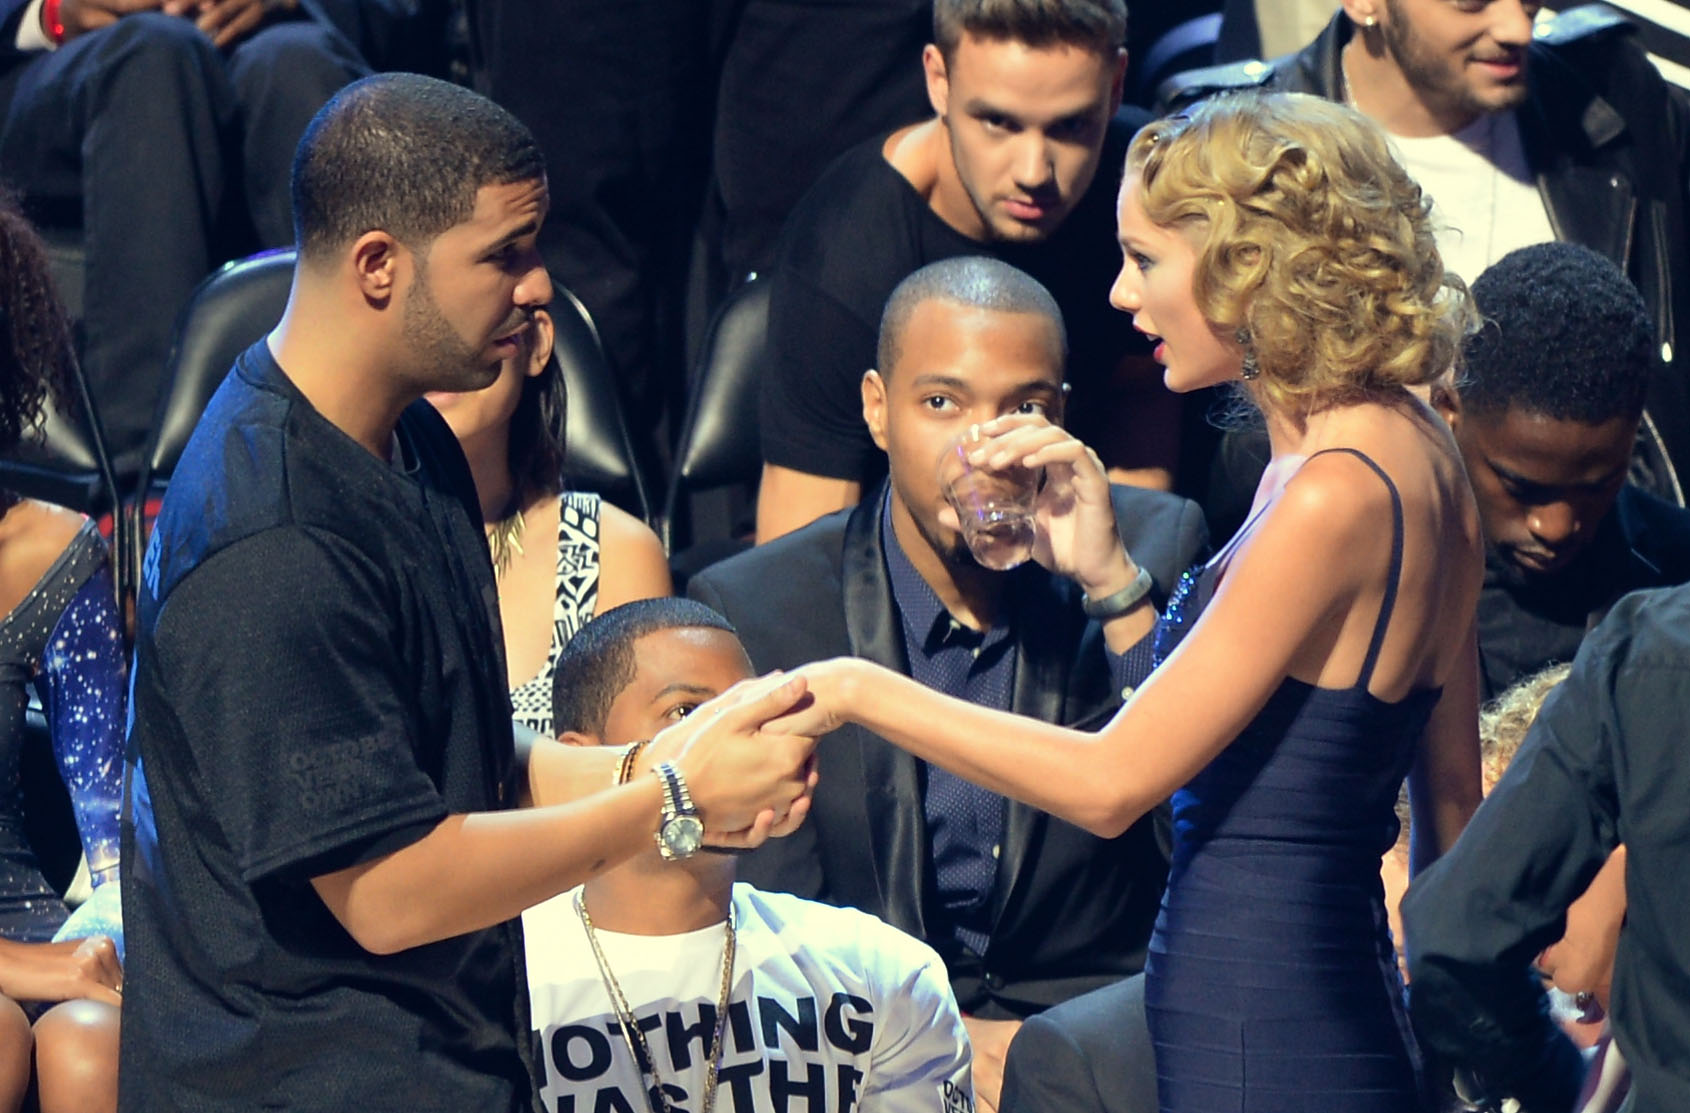 Drake and Taylor Swift attend the 2013 MTV Video Music Awards at the Barclays Center on August 25, 2013 in New York City. (Andrew H. Walker—WireImage)